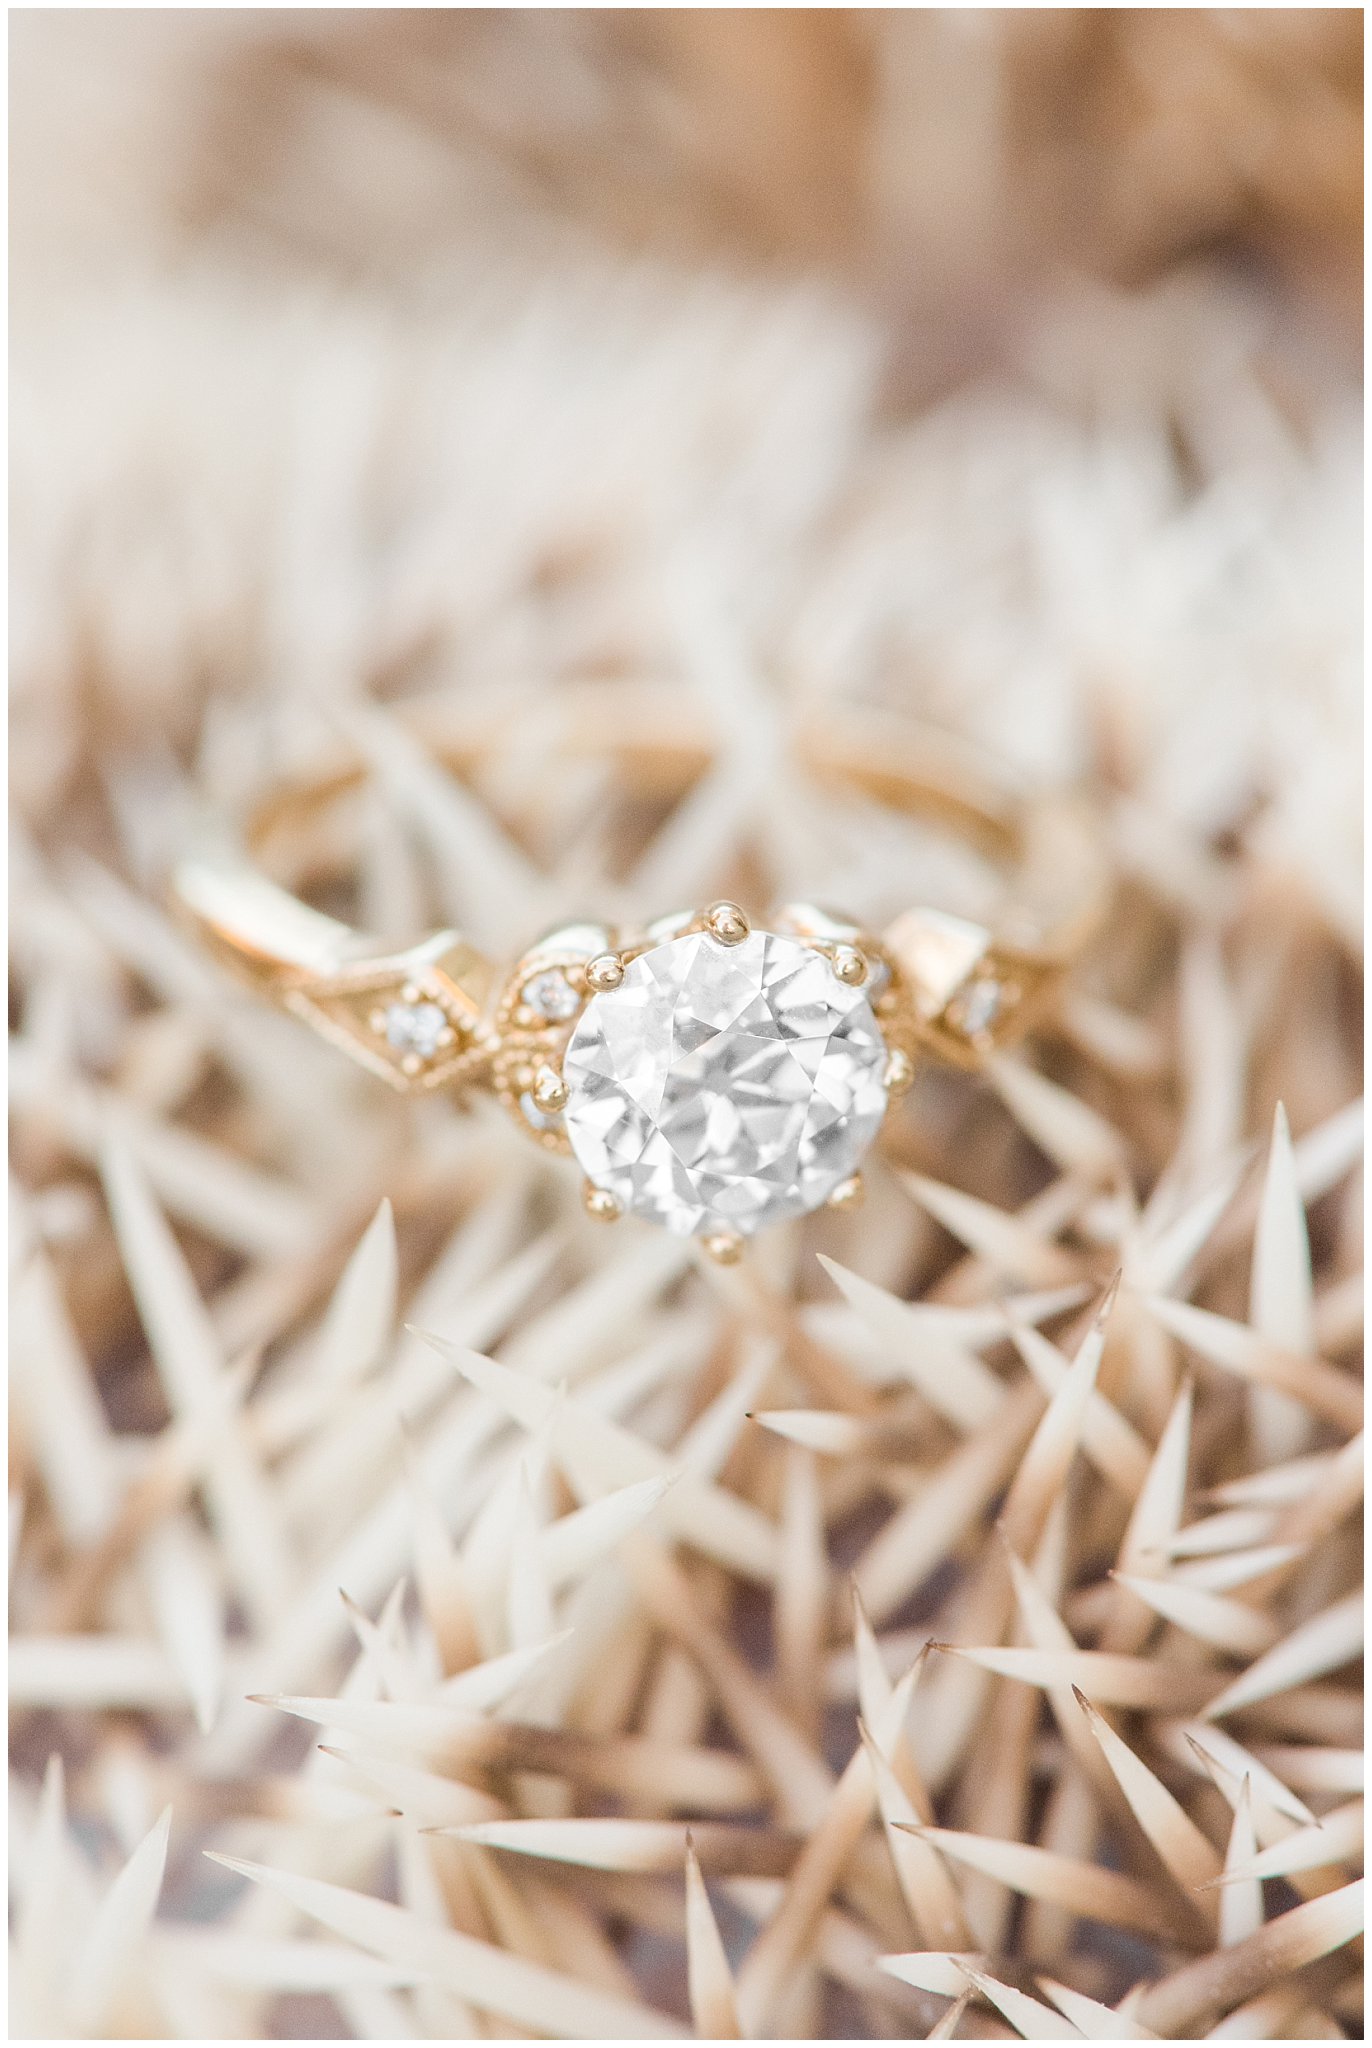 Vintage engagement ring on top of hedgehog | Top Utah Wedding and Couples Photos 2019 | Jessie and Dallin Photography